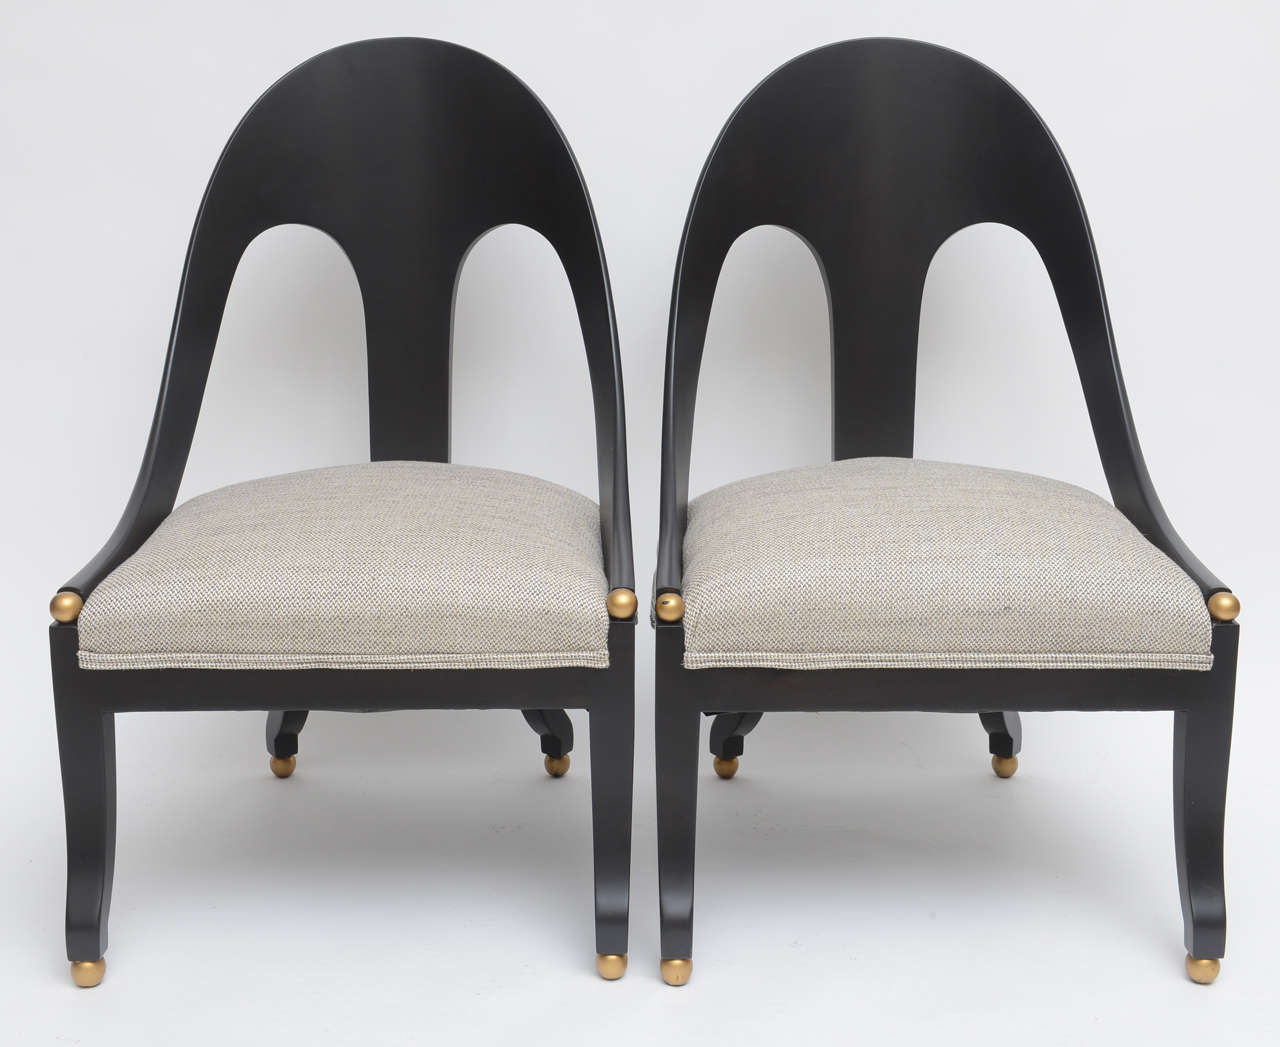 Pair of Michael Taylor for Baker spoon back lounge chairs.
Mahogany dowel jointed kiln dried base, newly refinished in an ebonized satin lacquer finish, with gold finial ball feet.
Finial ball details to the end of the armrests.
Newly